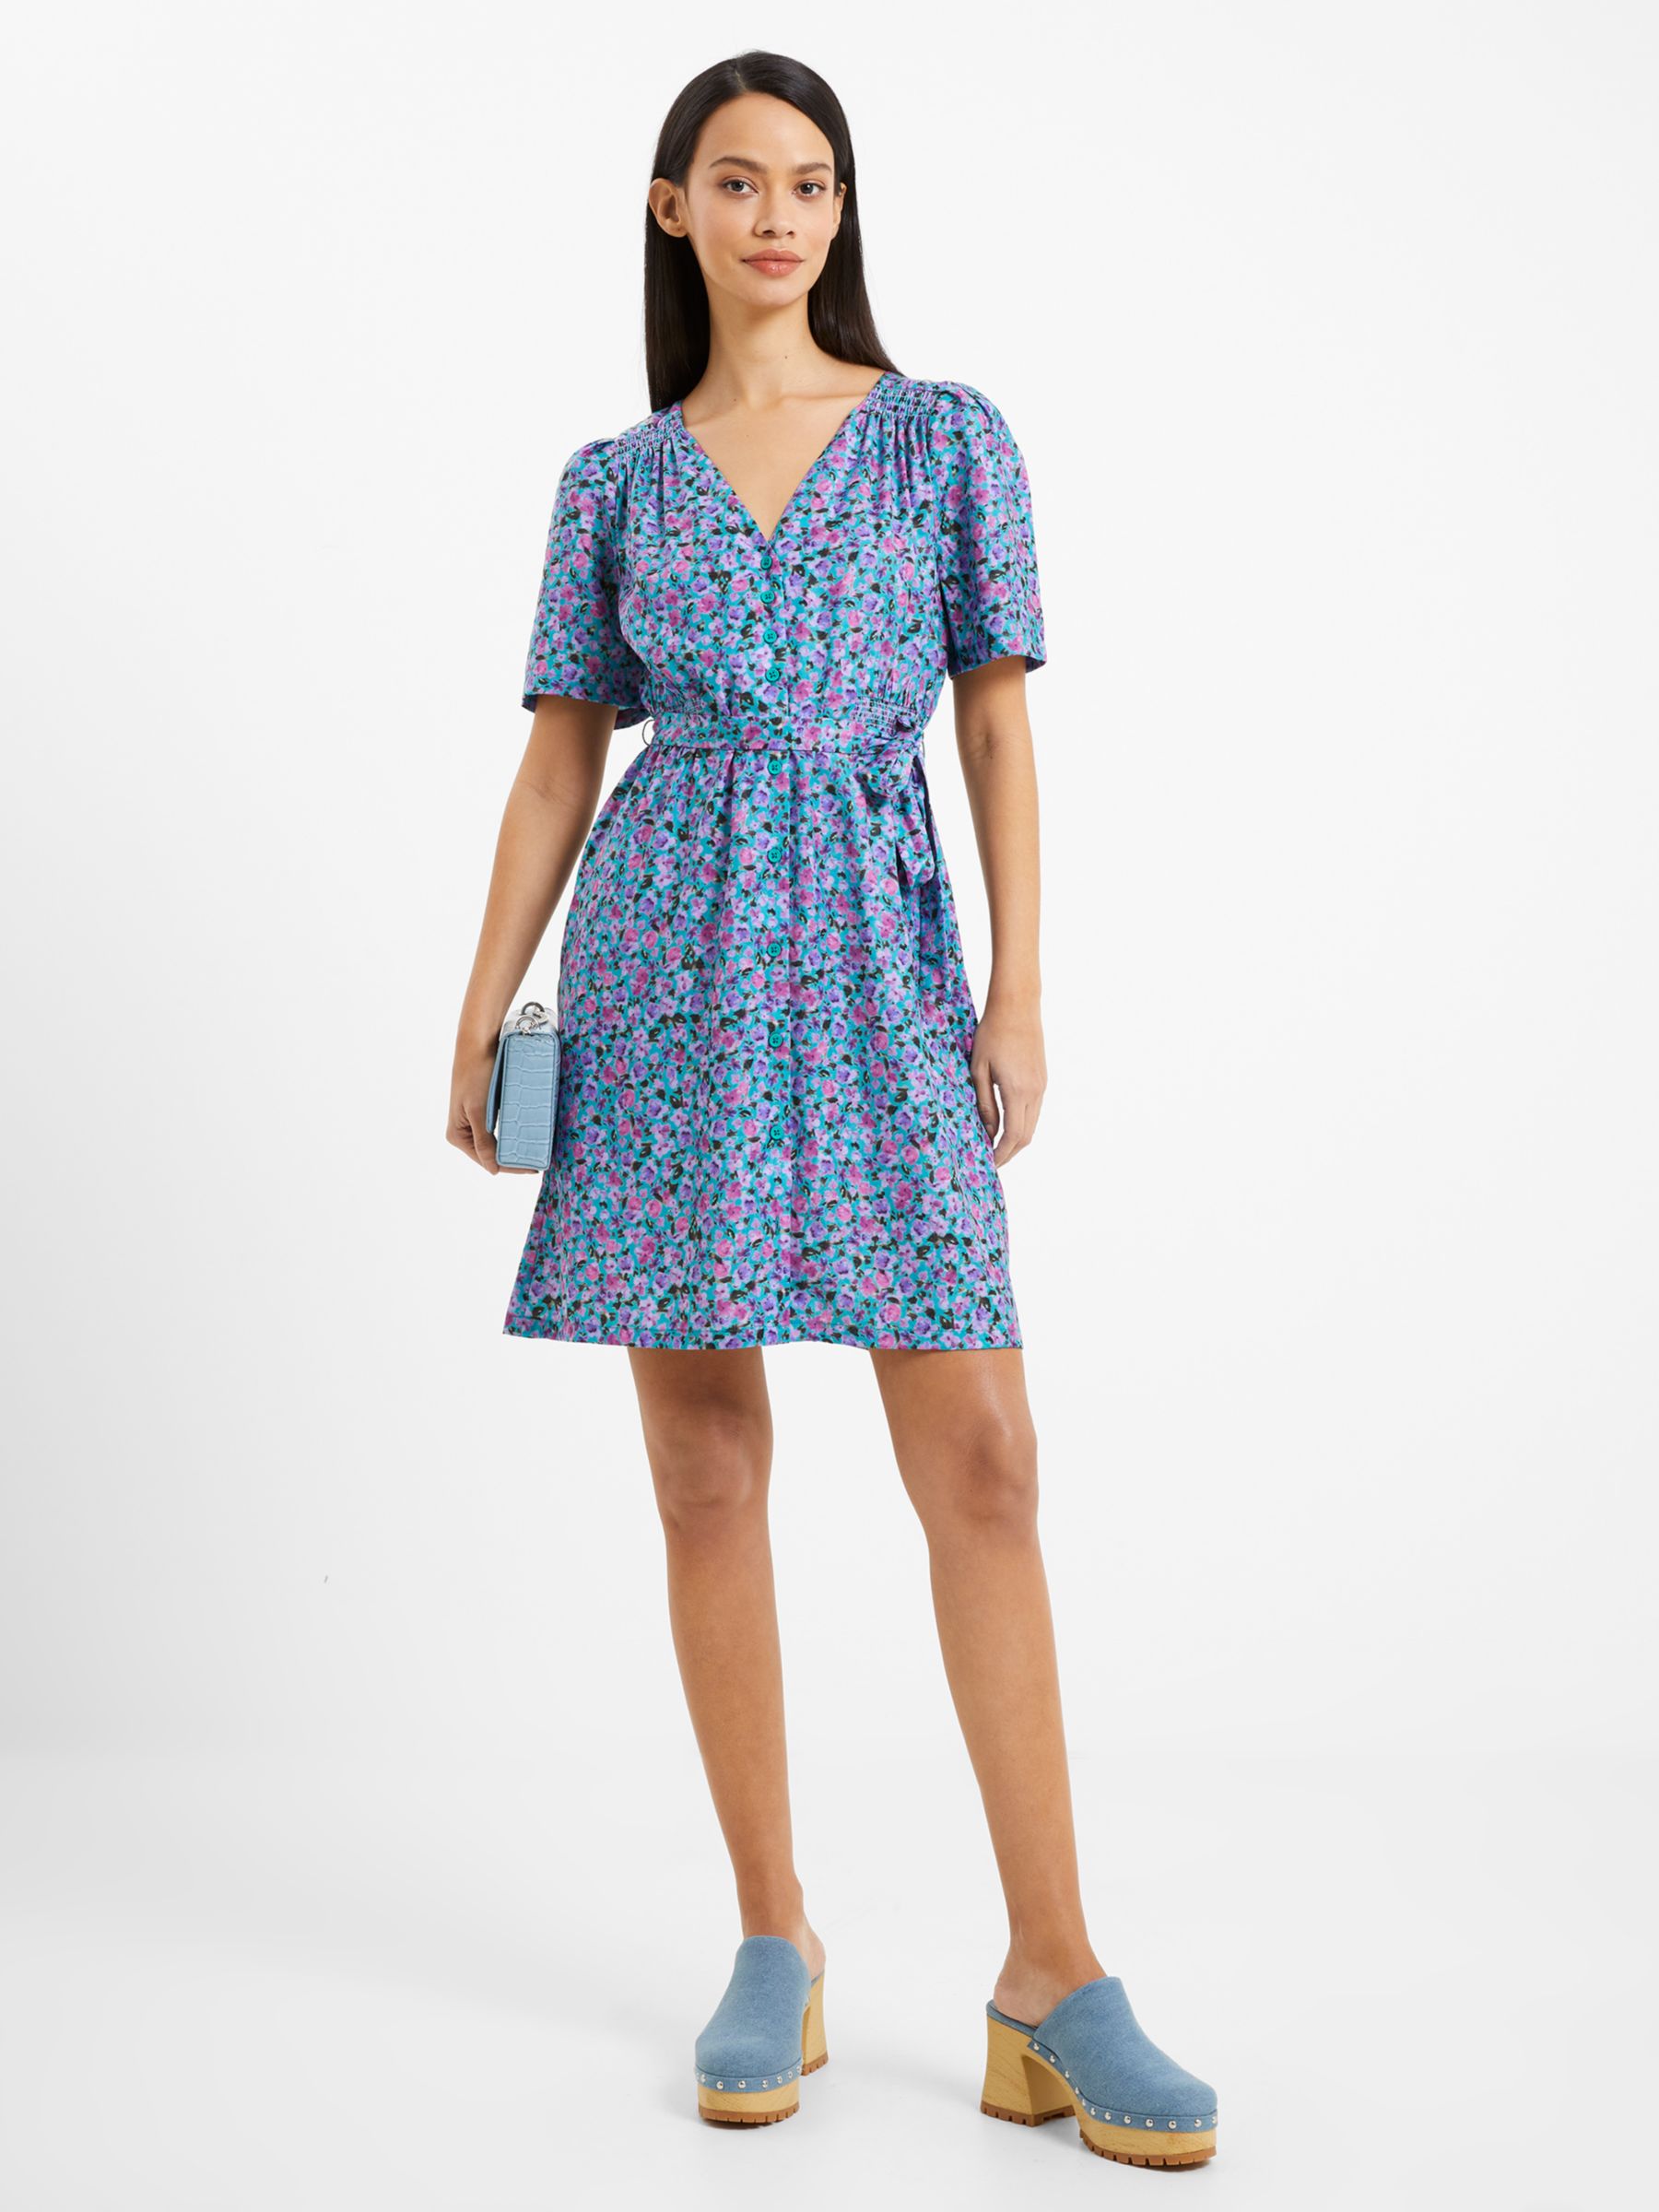 French Connection Alezzia Floral Mini Dress, Jaded Teal at John Lewis ...